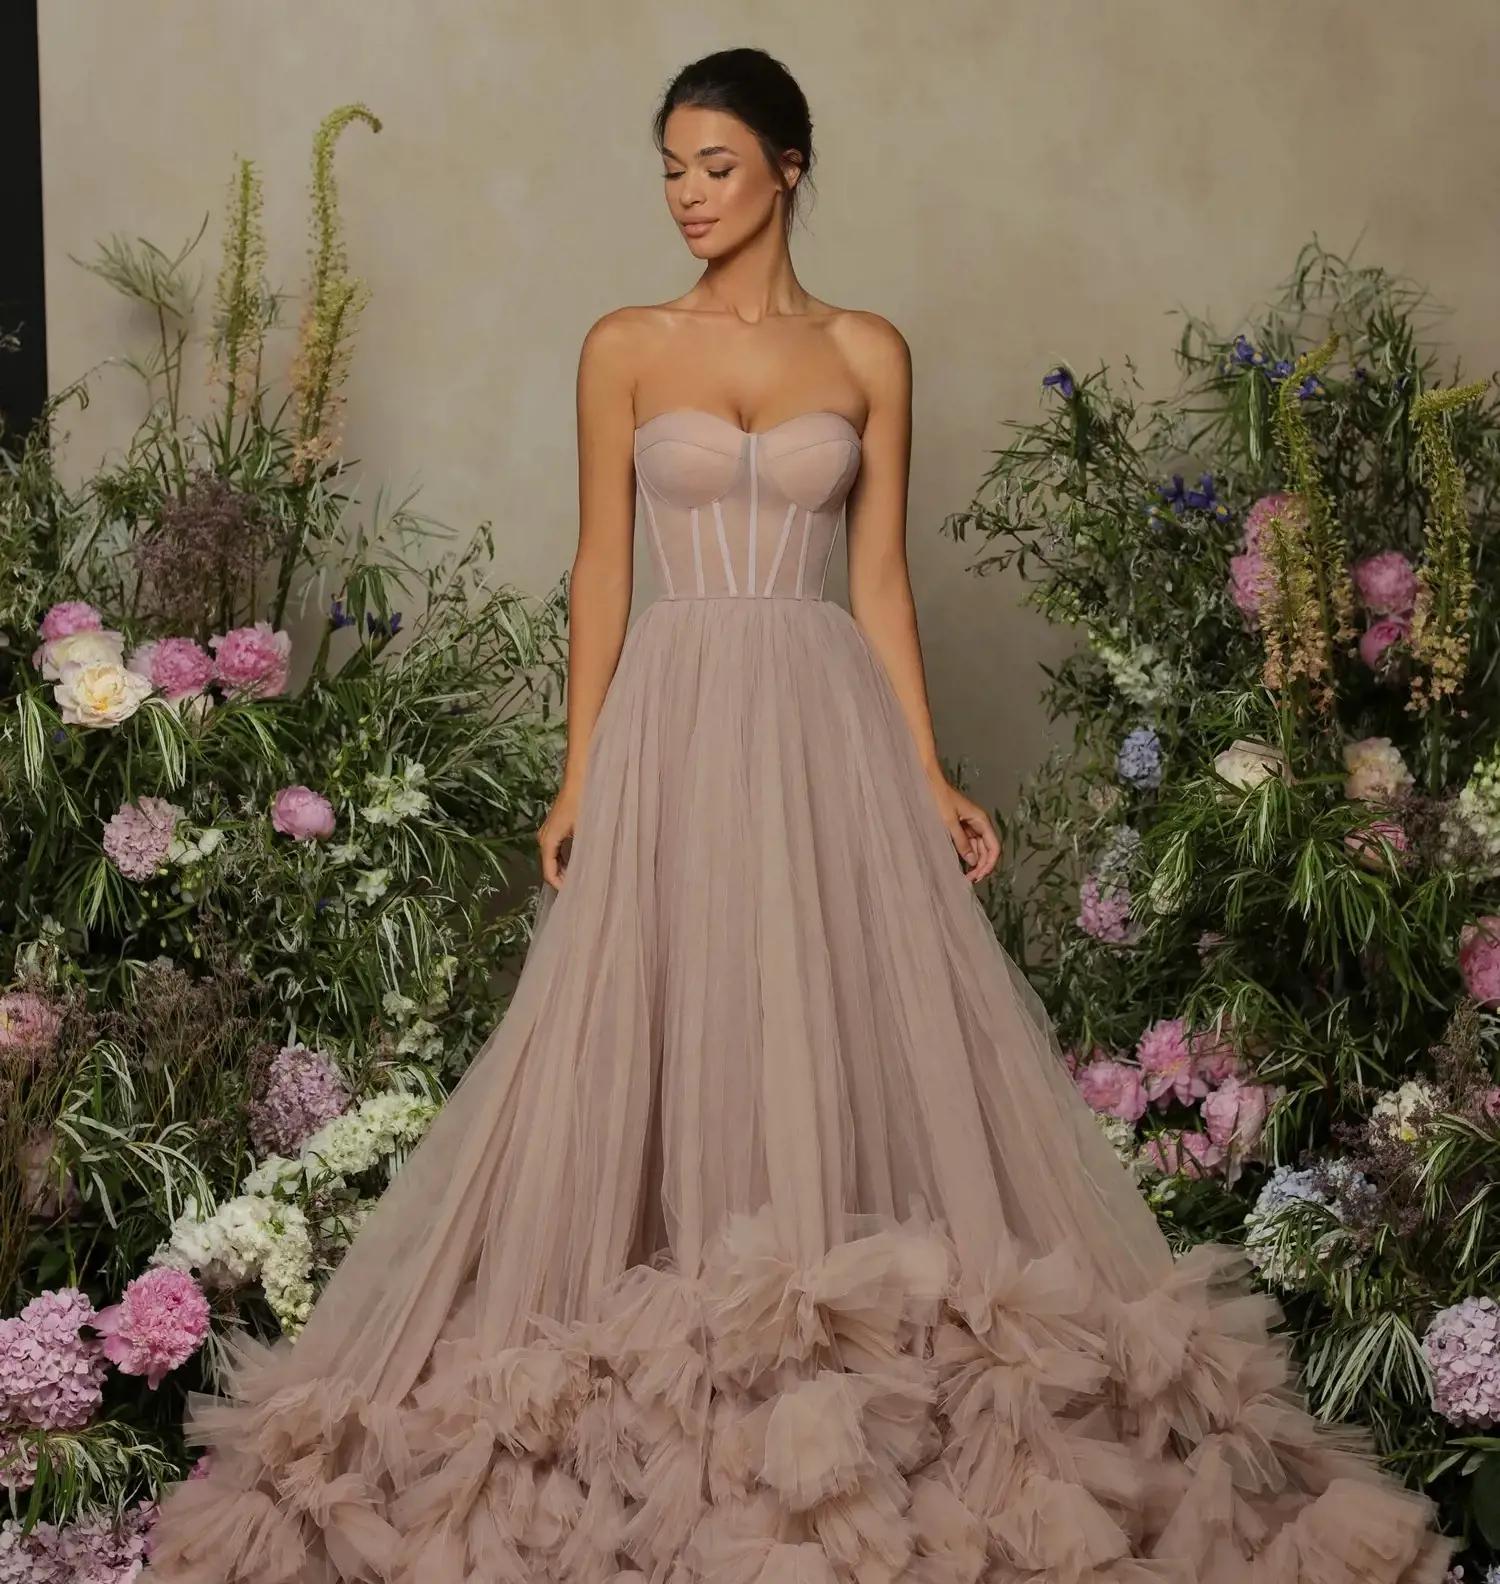 Prom Dresses That Will Make You Feel Like a Princess Image